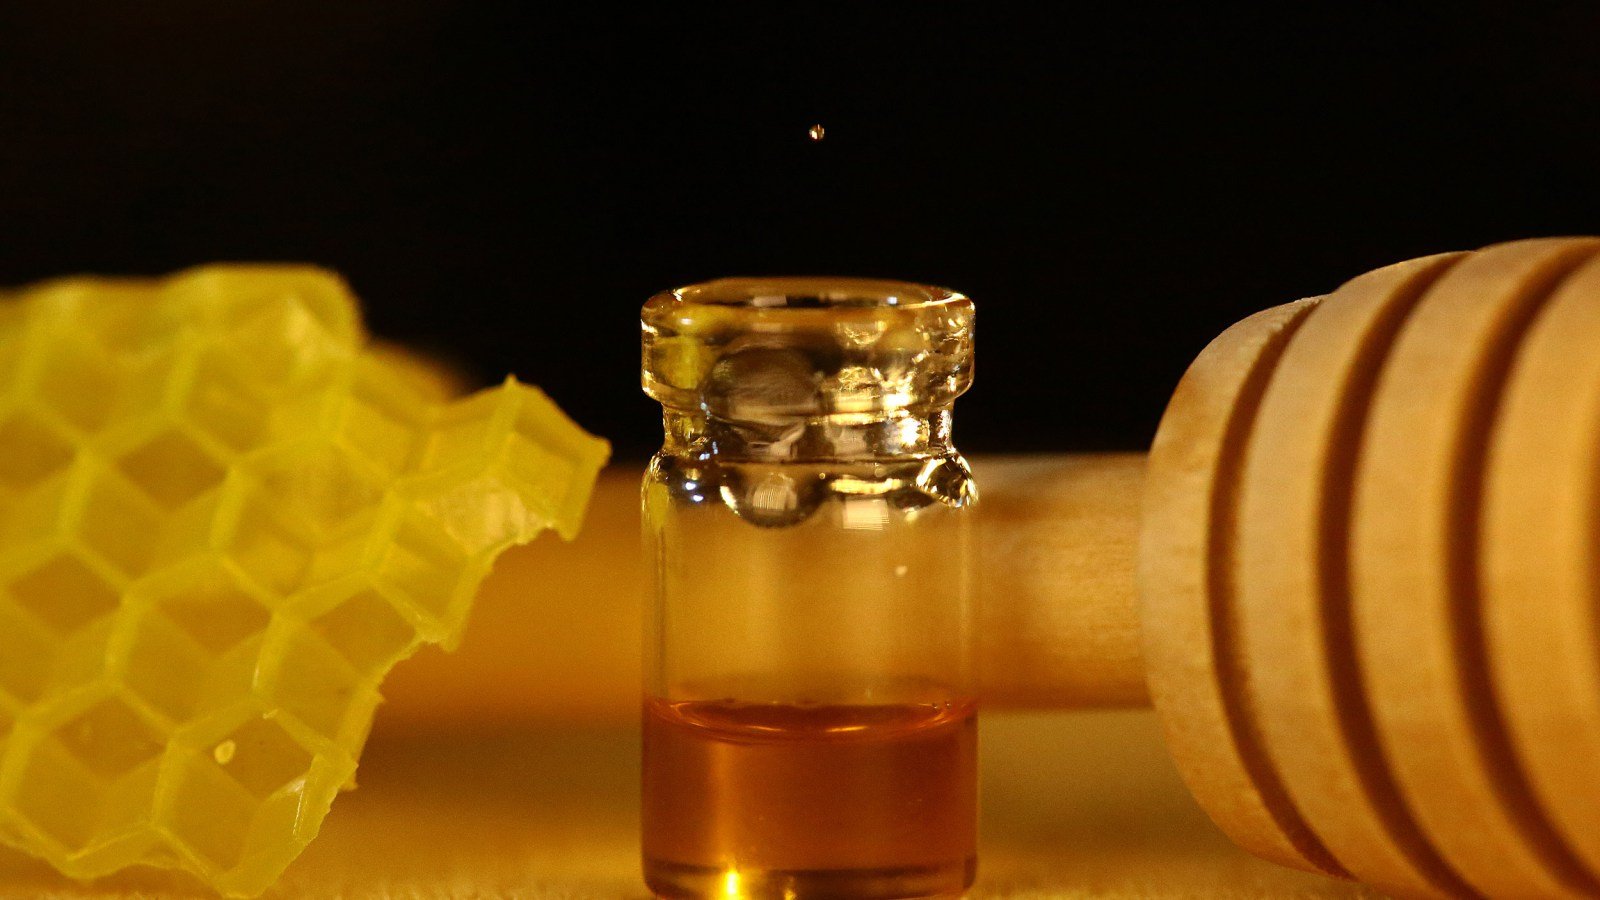 Honey is a prototypical example for viscous fluid, being 25 thousand times more viscous than water. Acoustophoretic printing enables droplet formation of any material, generating the tiniest possible single drop of honey in a tiny honey jar